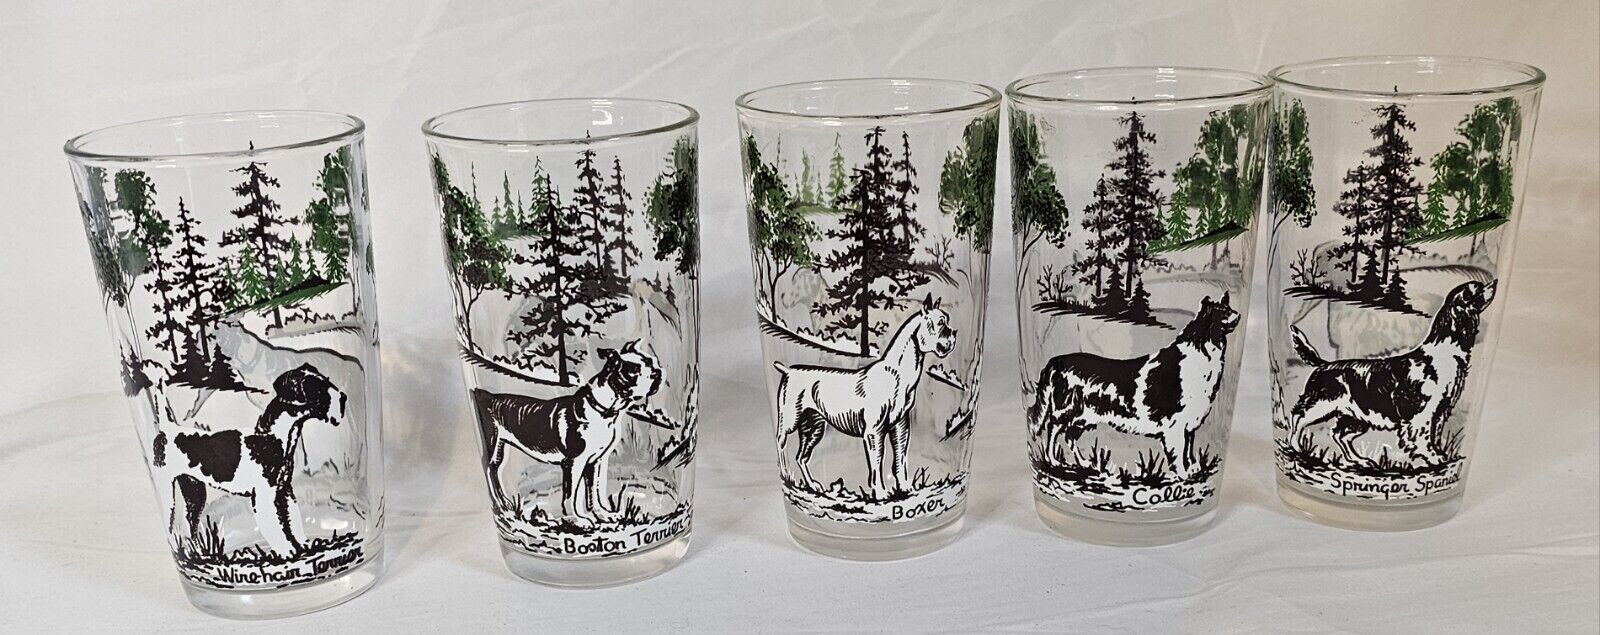 Set of 5 Vintage MCM Sports Dog Drinking Glasses Glasses Show 2 Breed Great Con